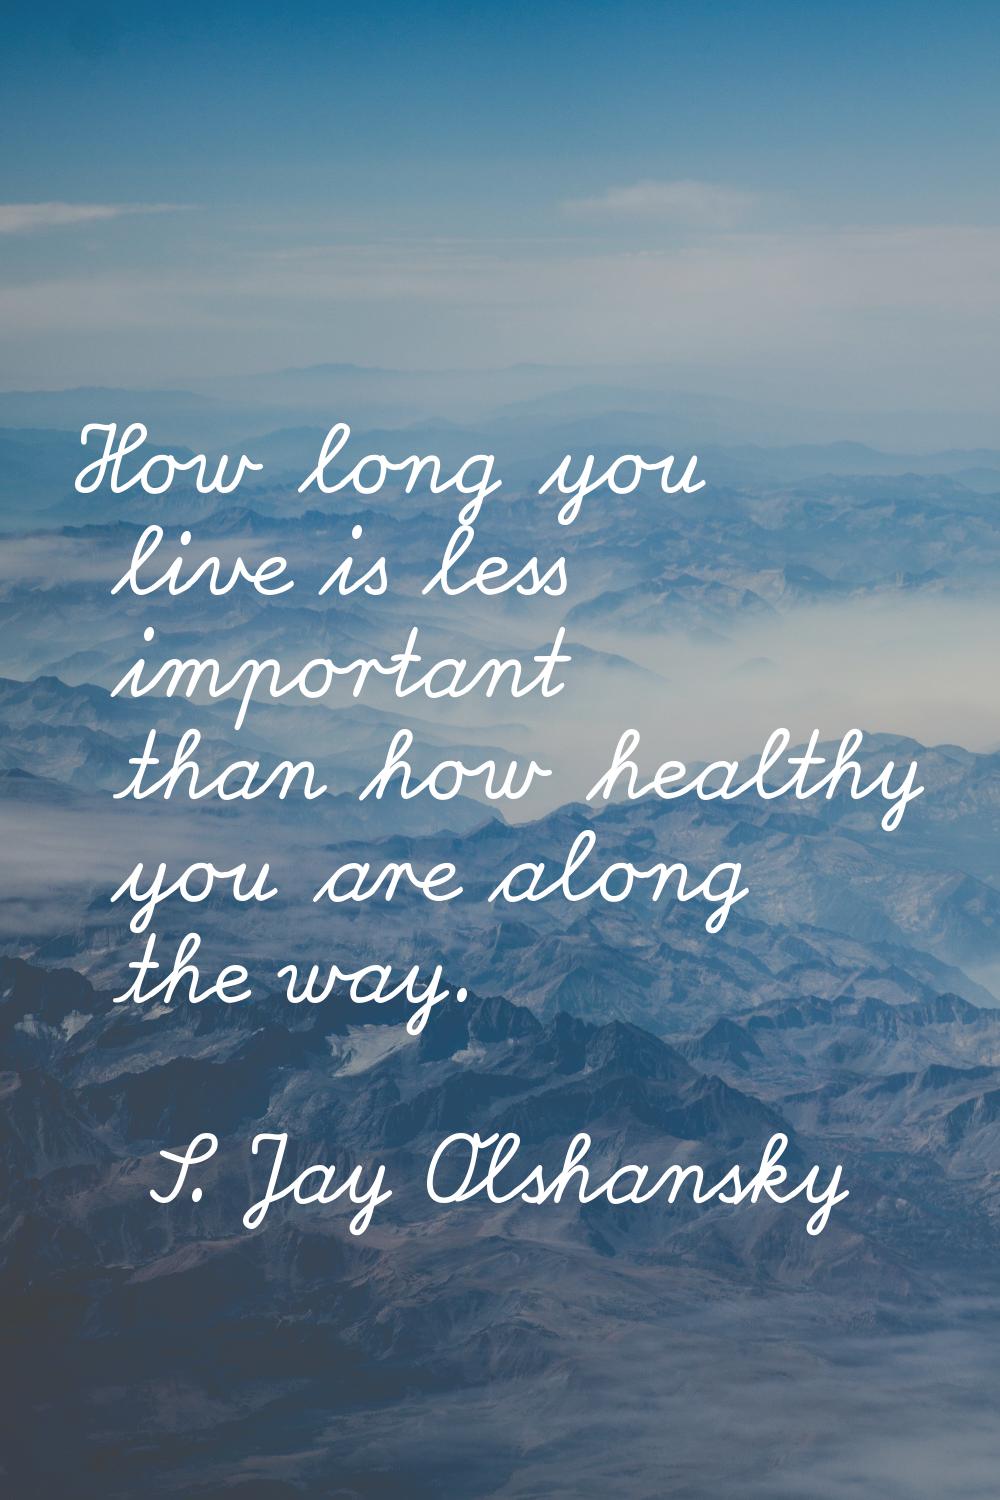 How long you live is less important than how healthy you are along the way.